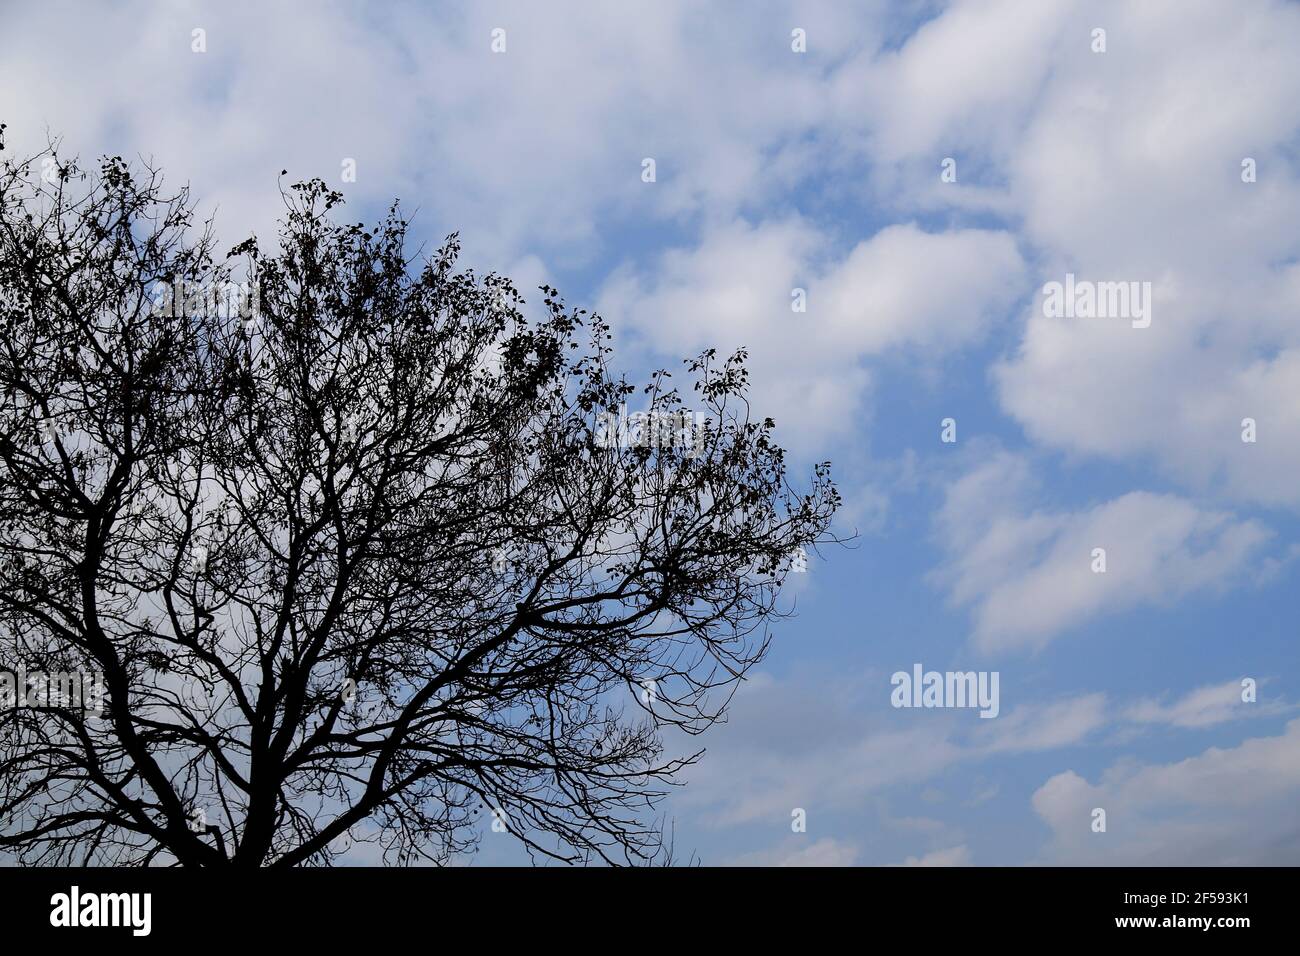 Tree silhouette against cloudy sky Stock Photo